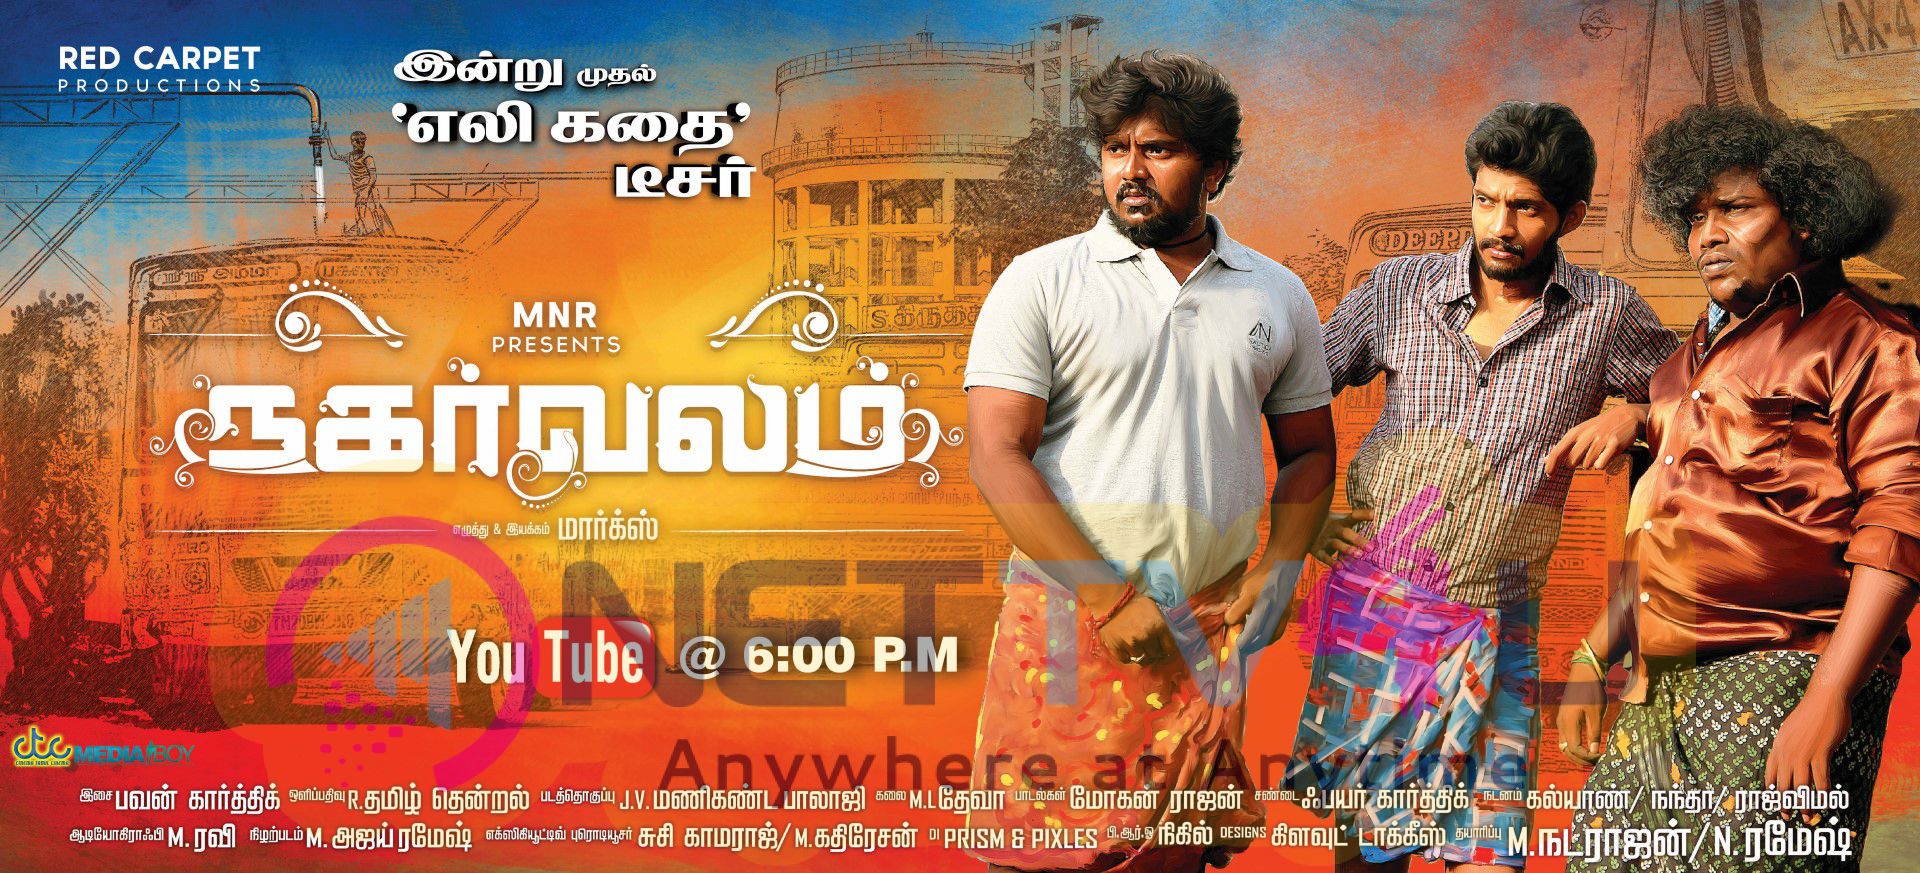 Nagarvalam Tamil Movie Teaser From Today Poster Tamil Gallery